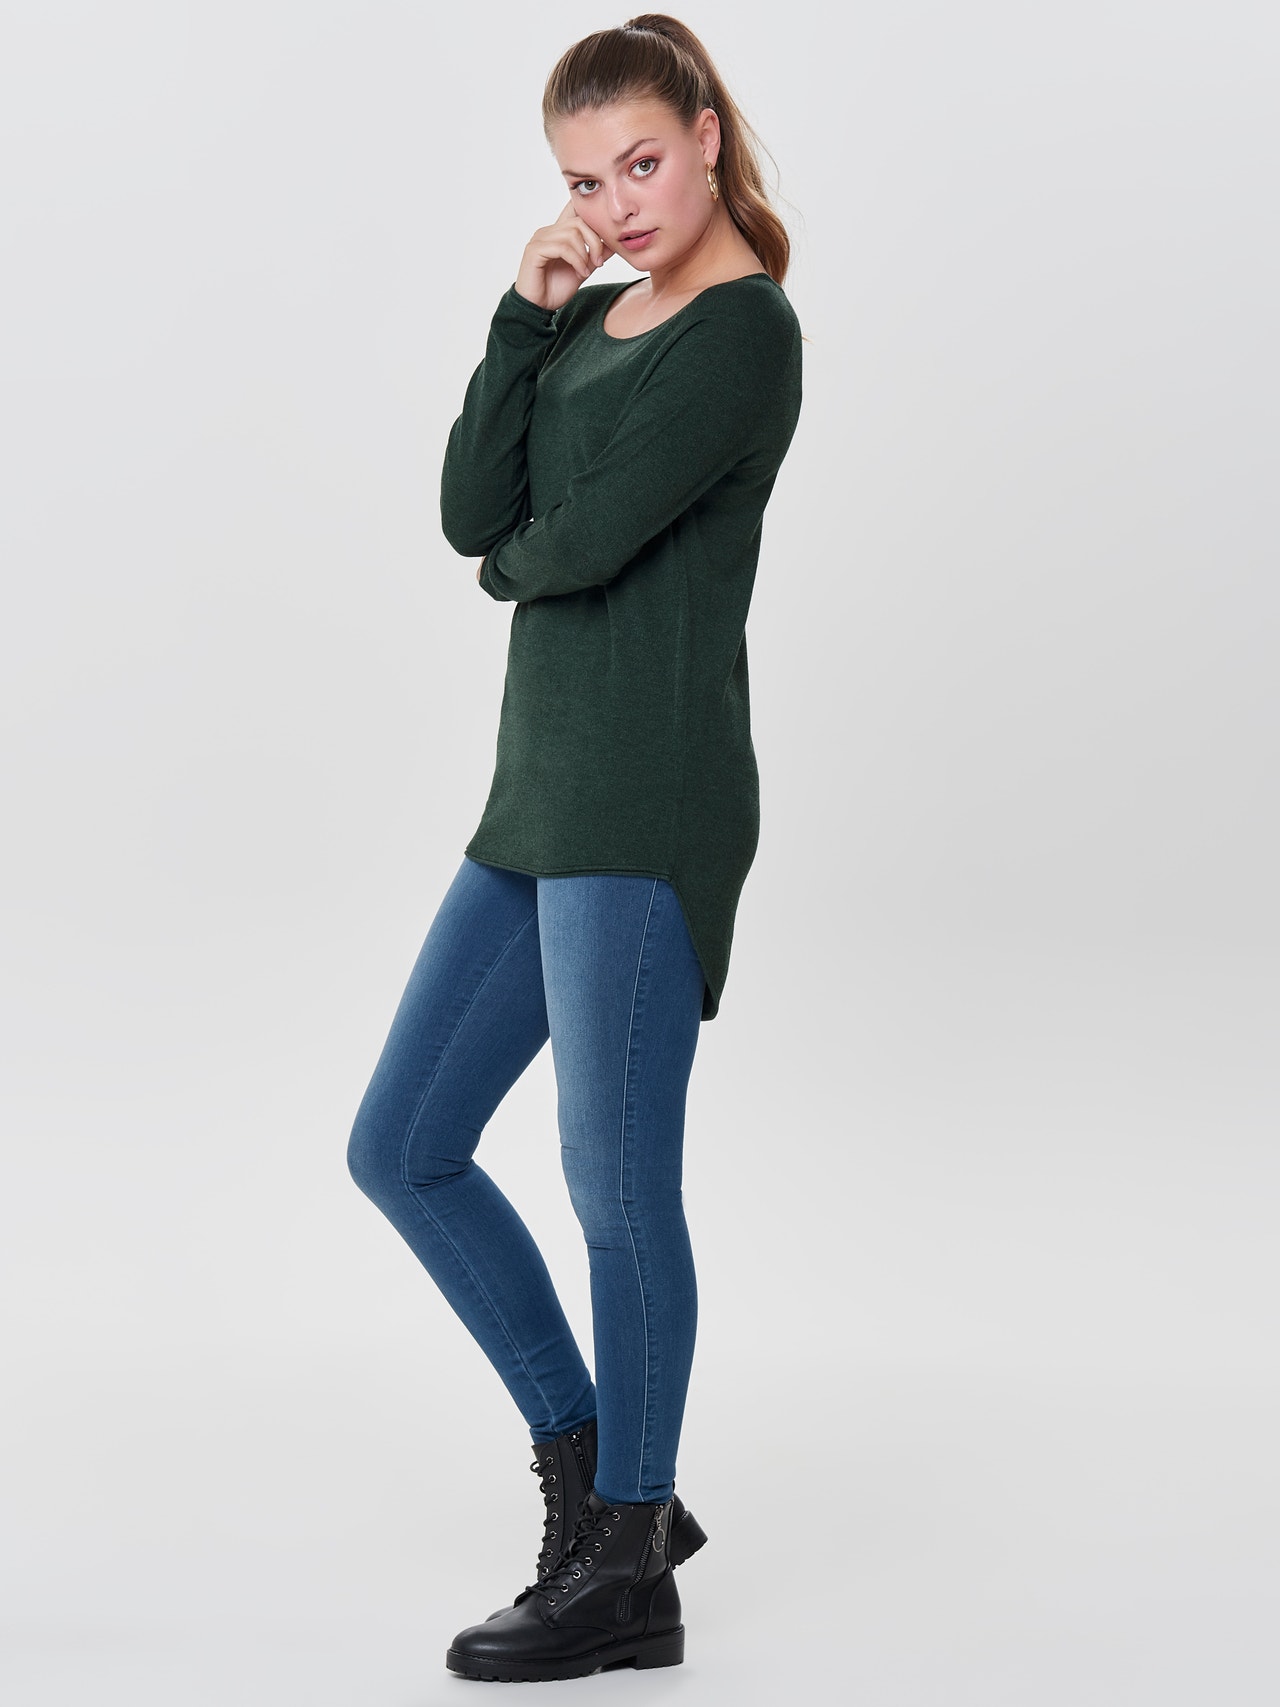 ONLY Round Neck Pullover -Green Gables - 15109964